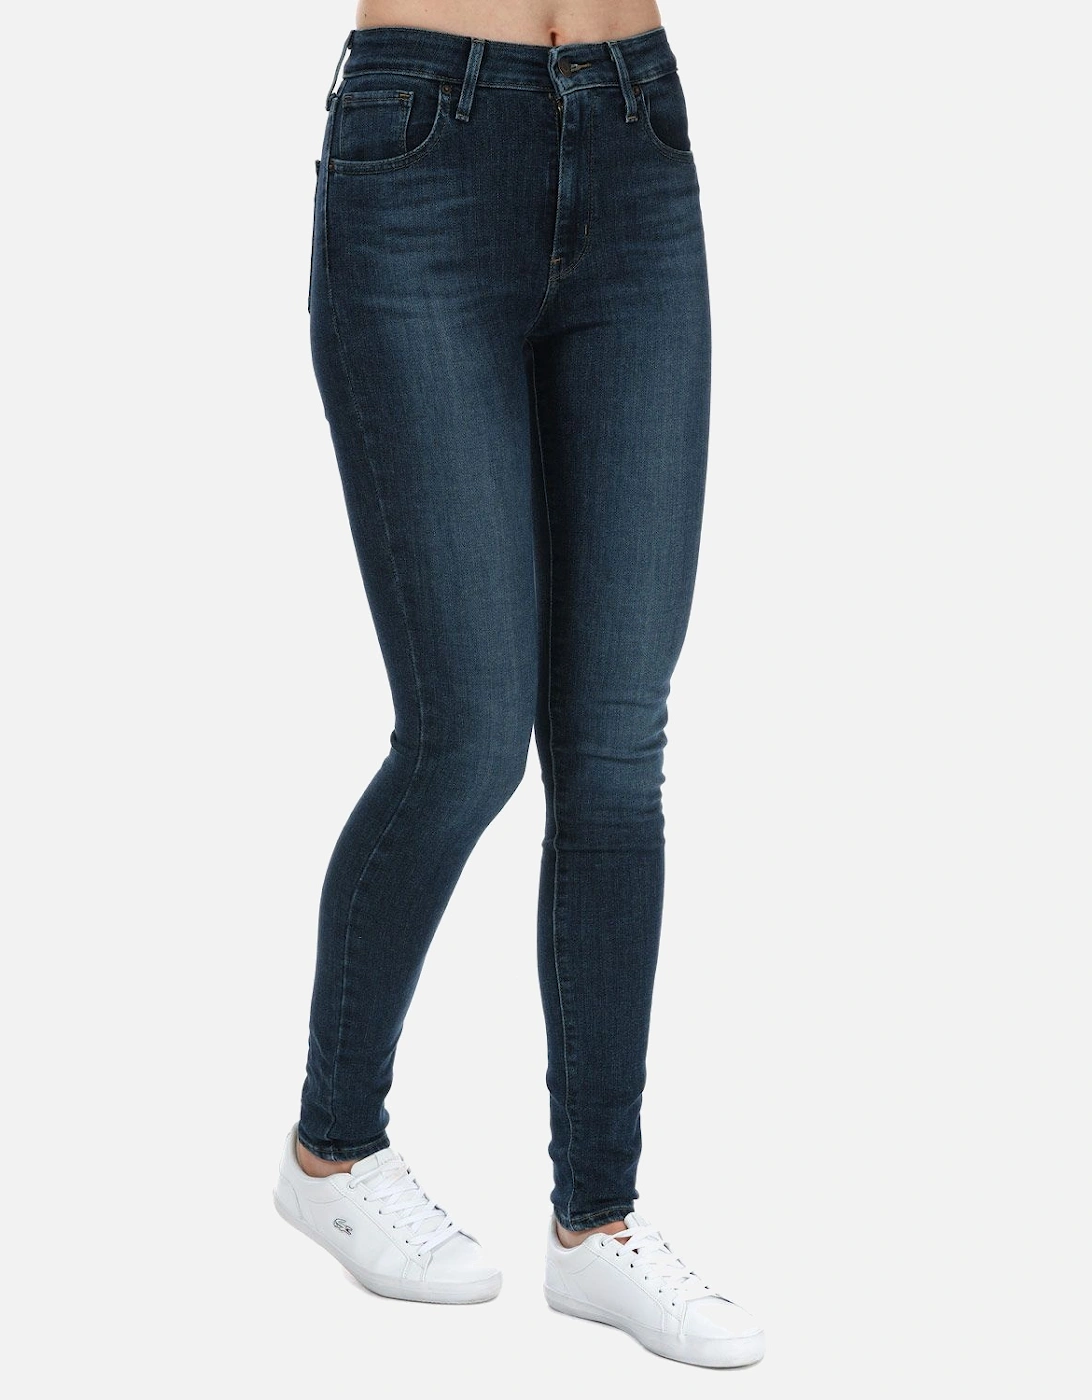 Womens 721 High Rise Skinny Jeans, 21 of 20